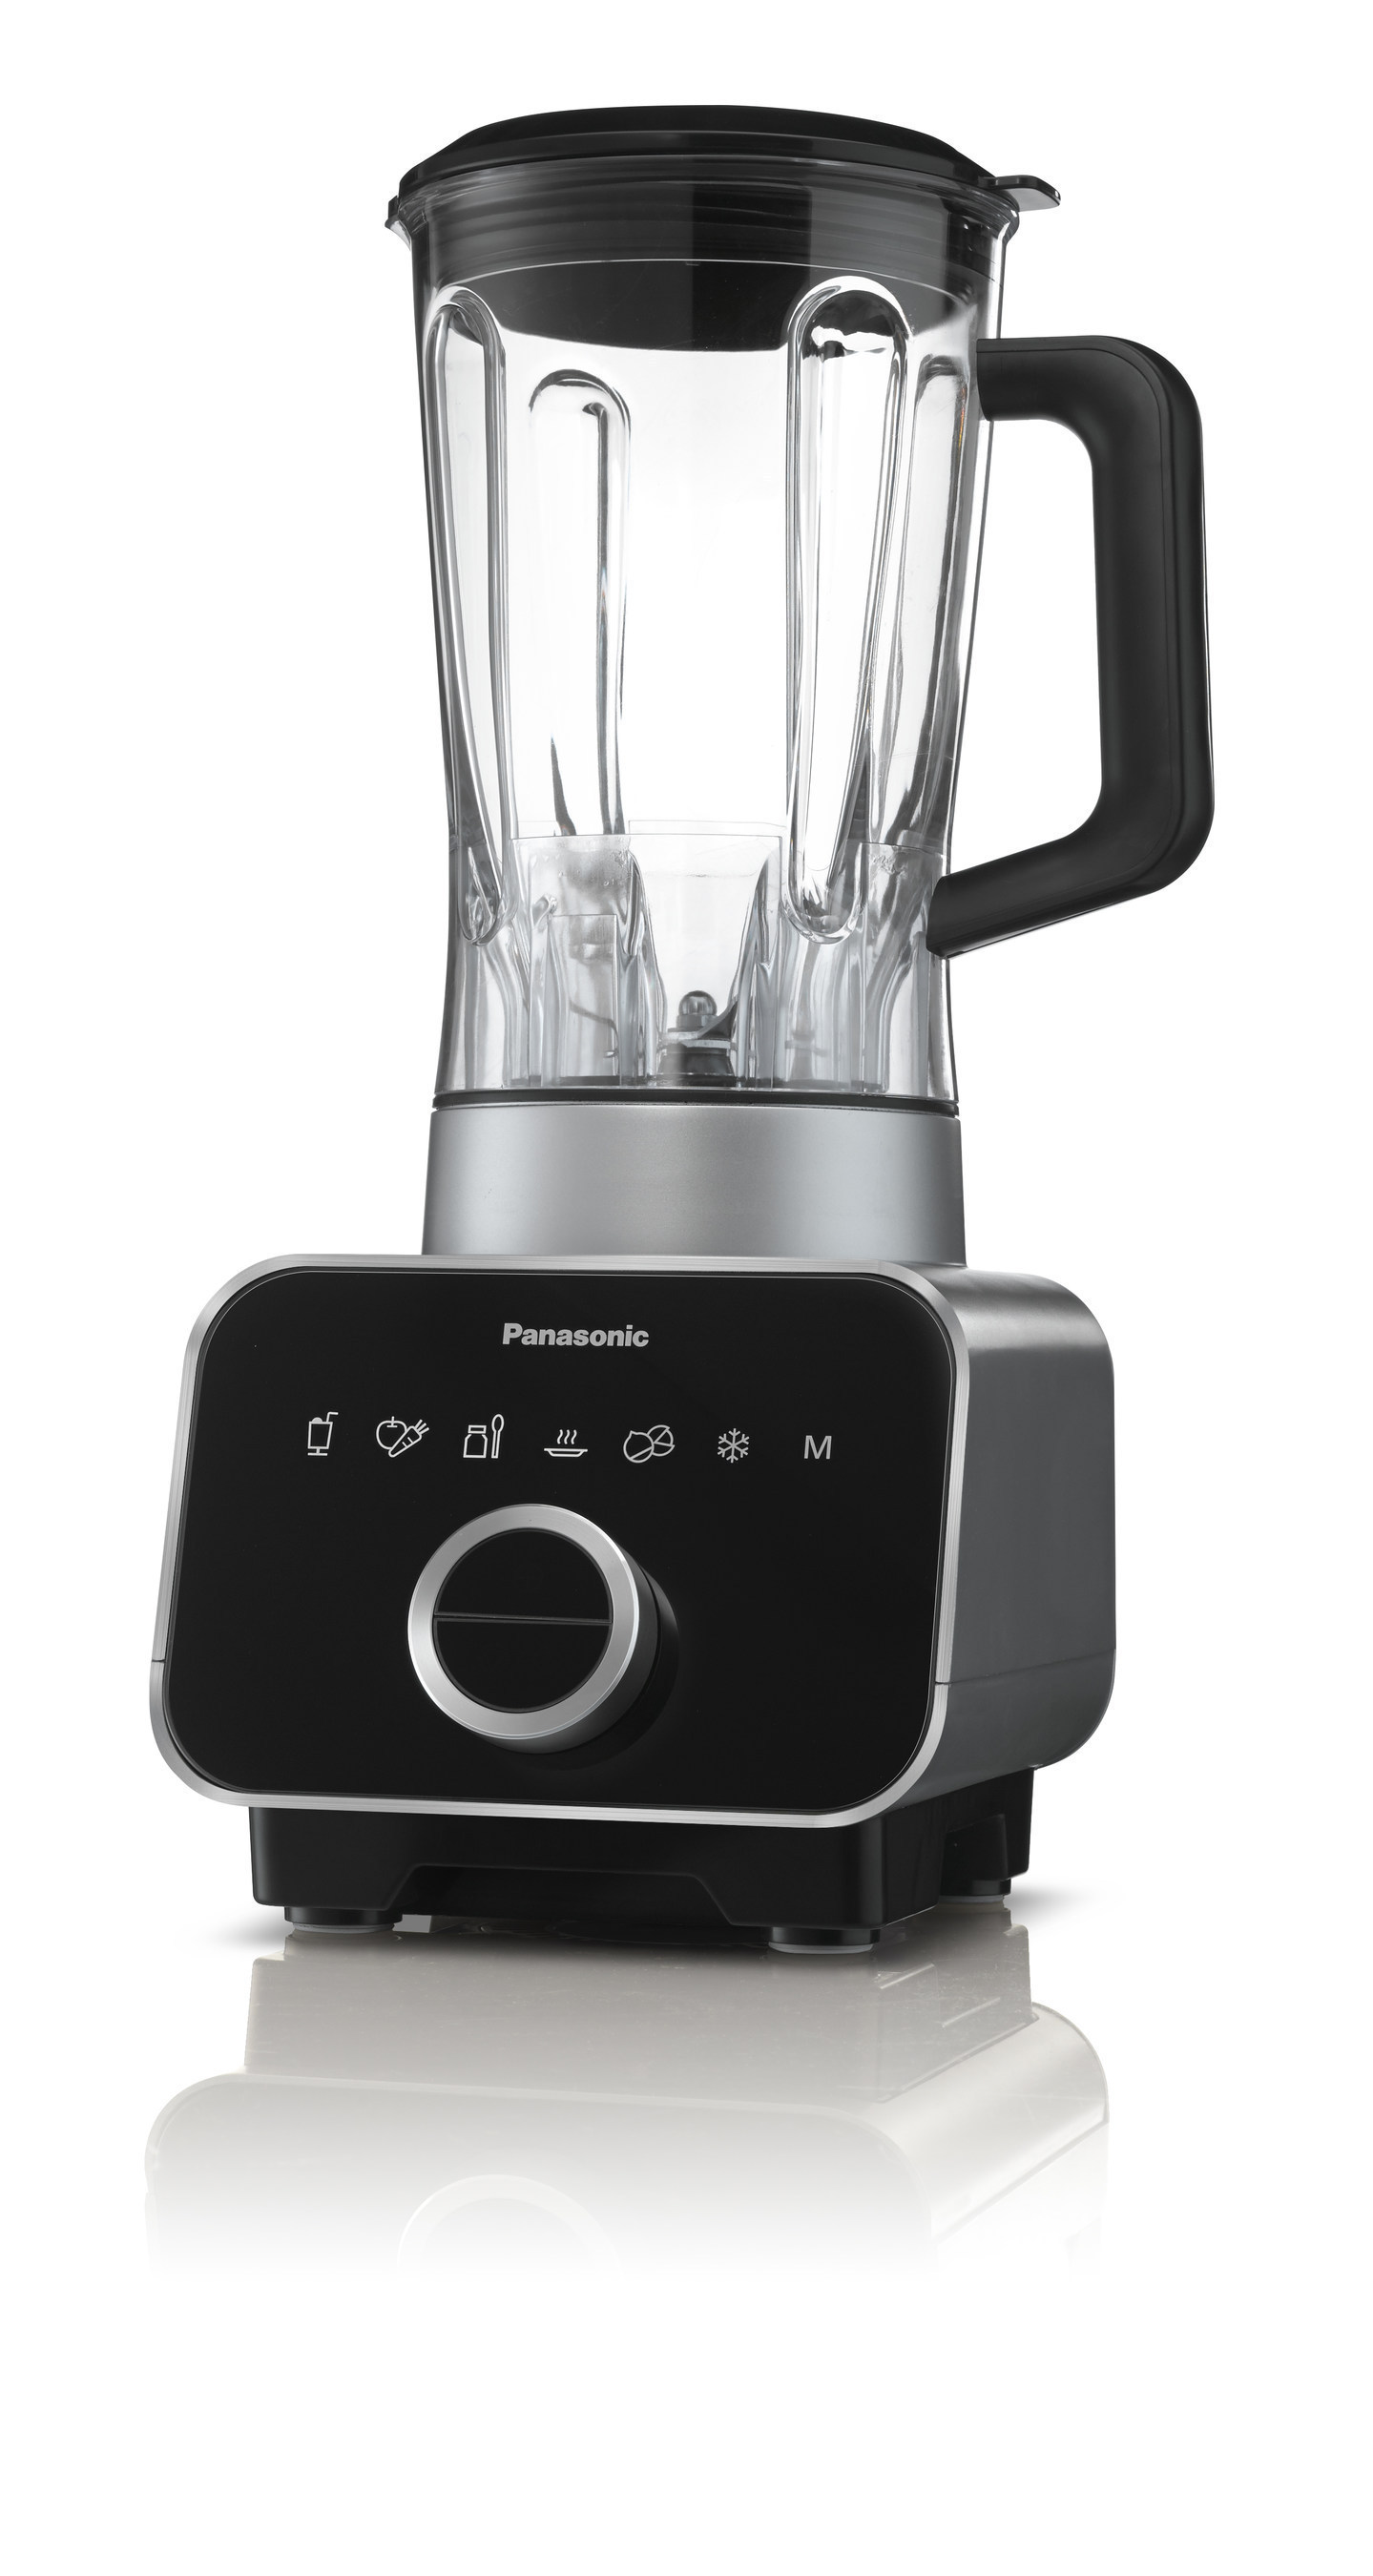 Panasonic Debuts First High-Power Blender For US Market At